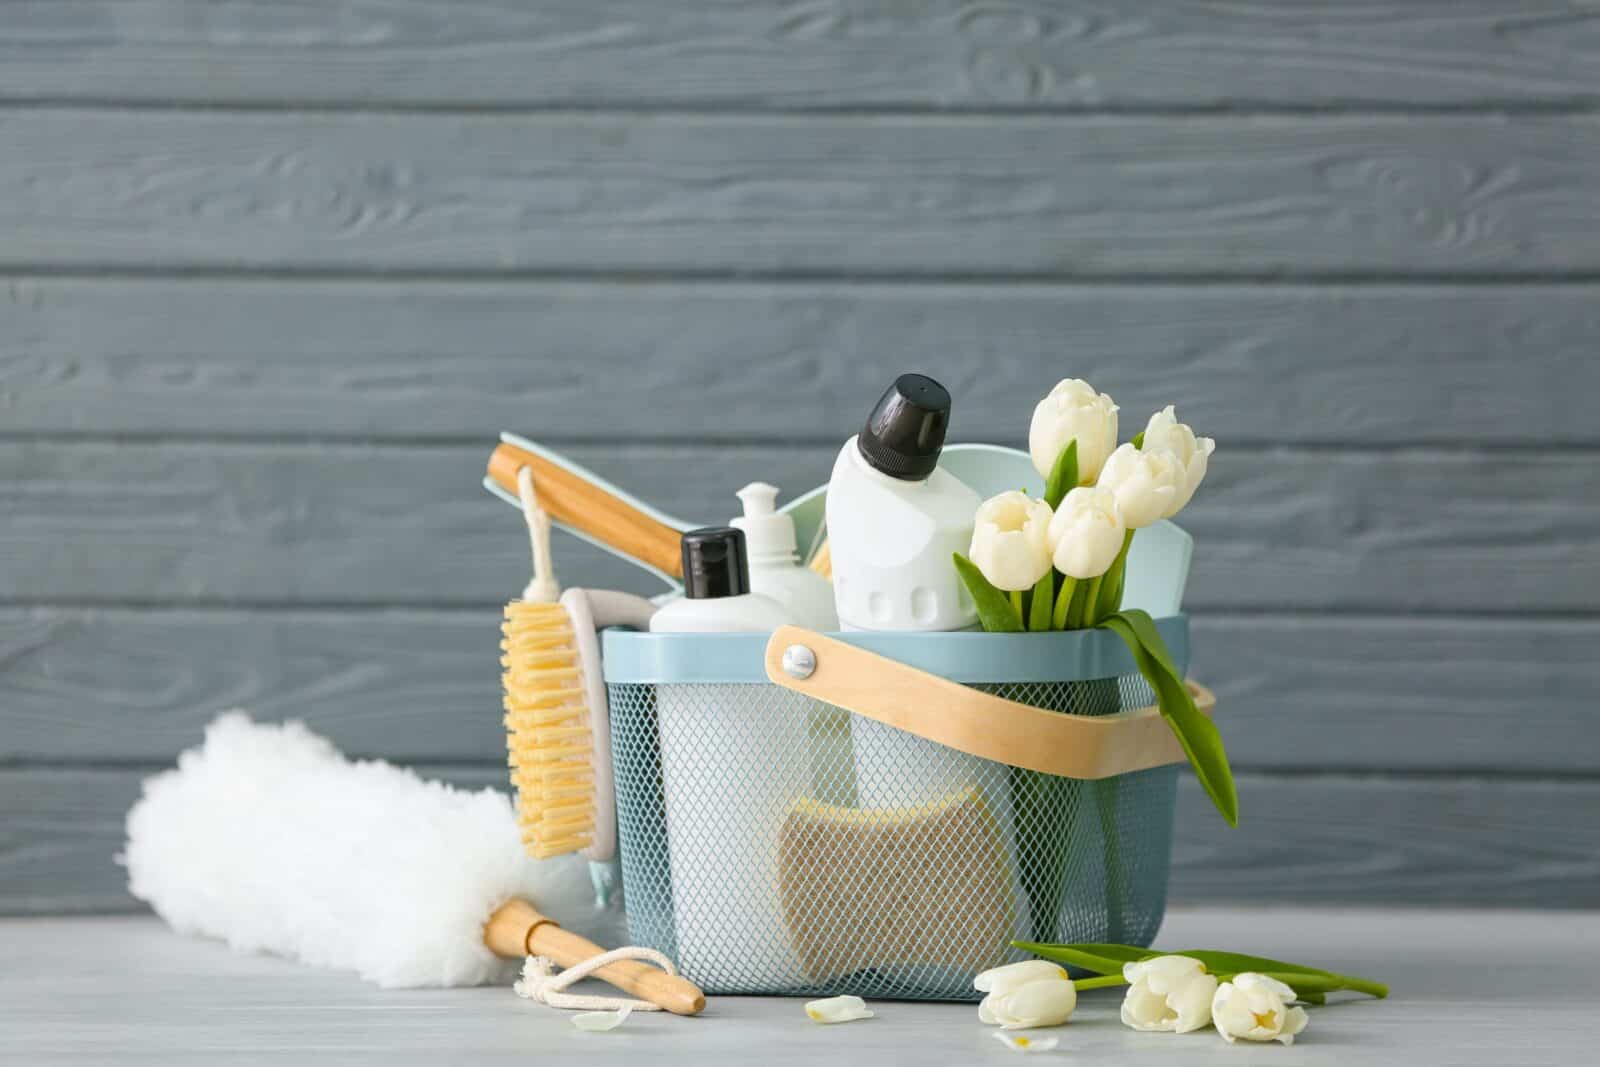 This Spring Cleaning Checklist for 2023 Includes All the Tools You